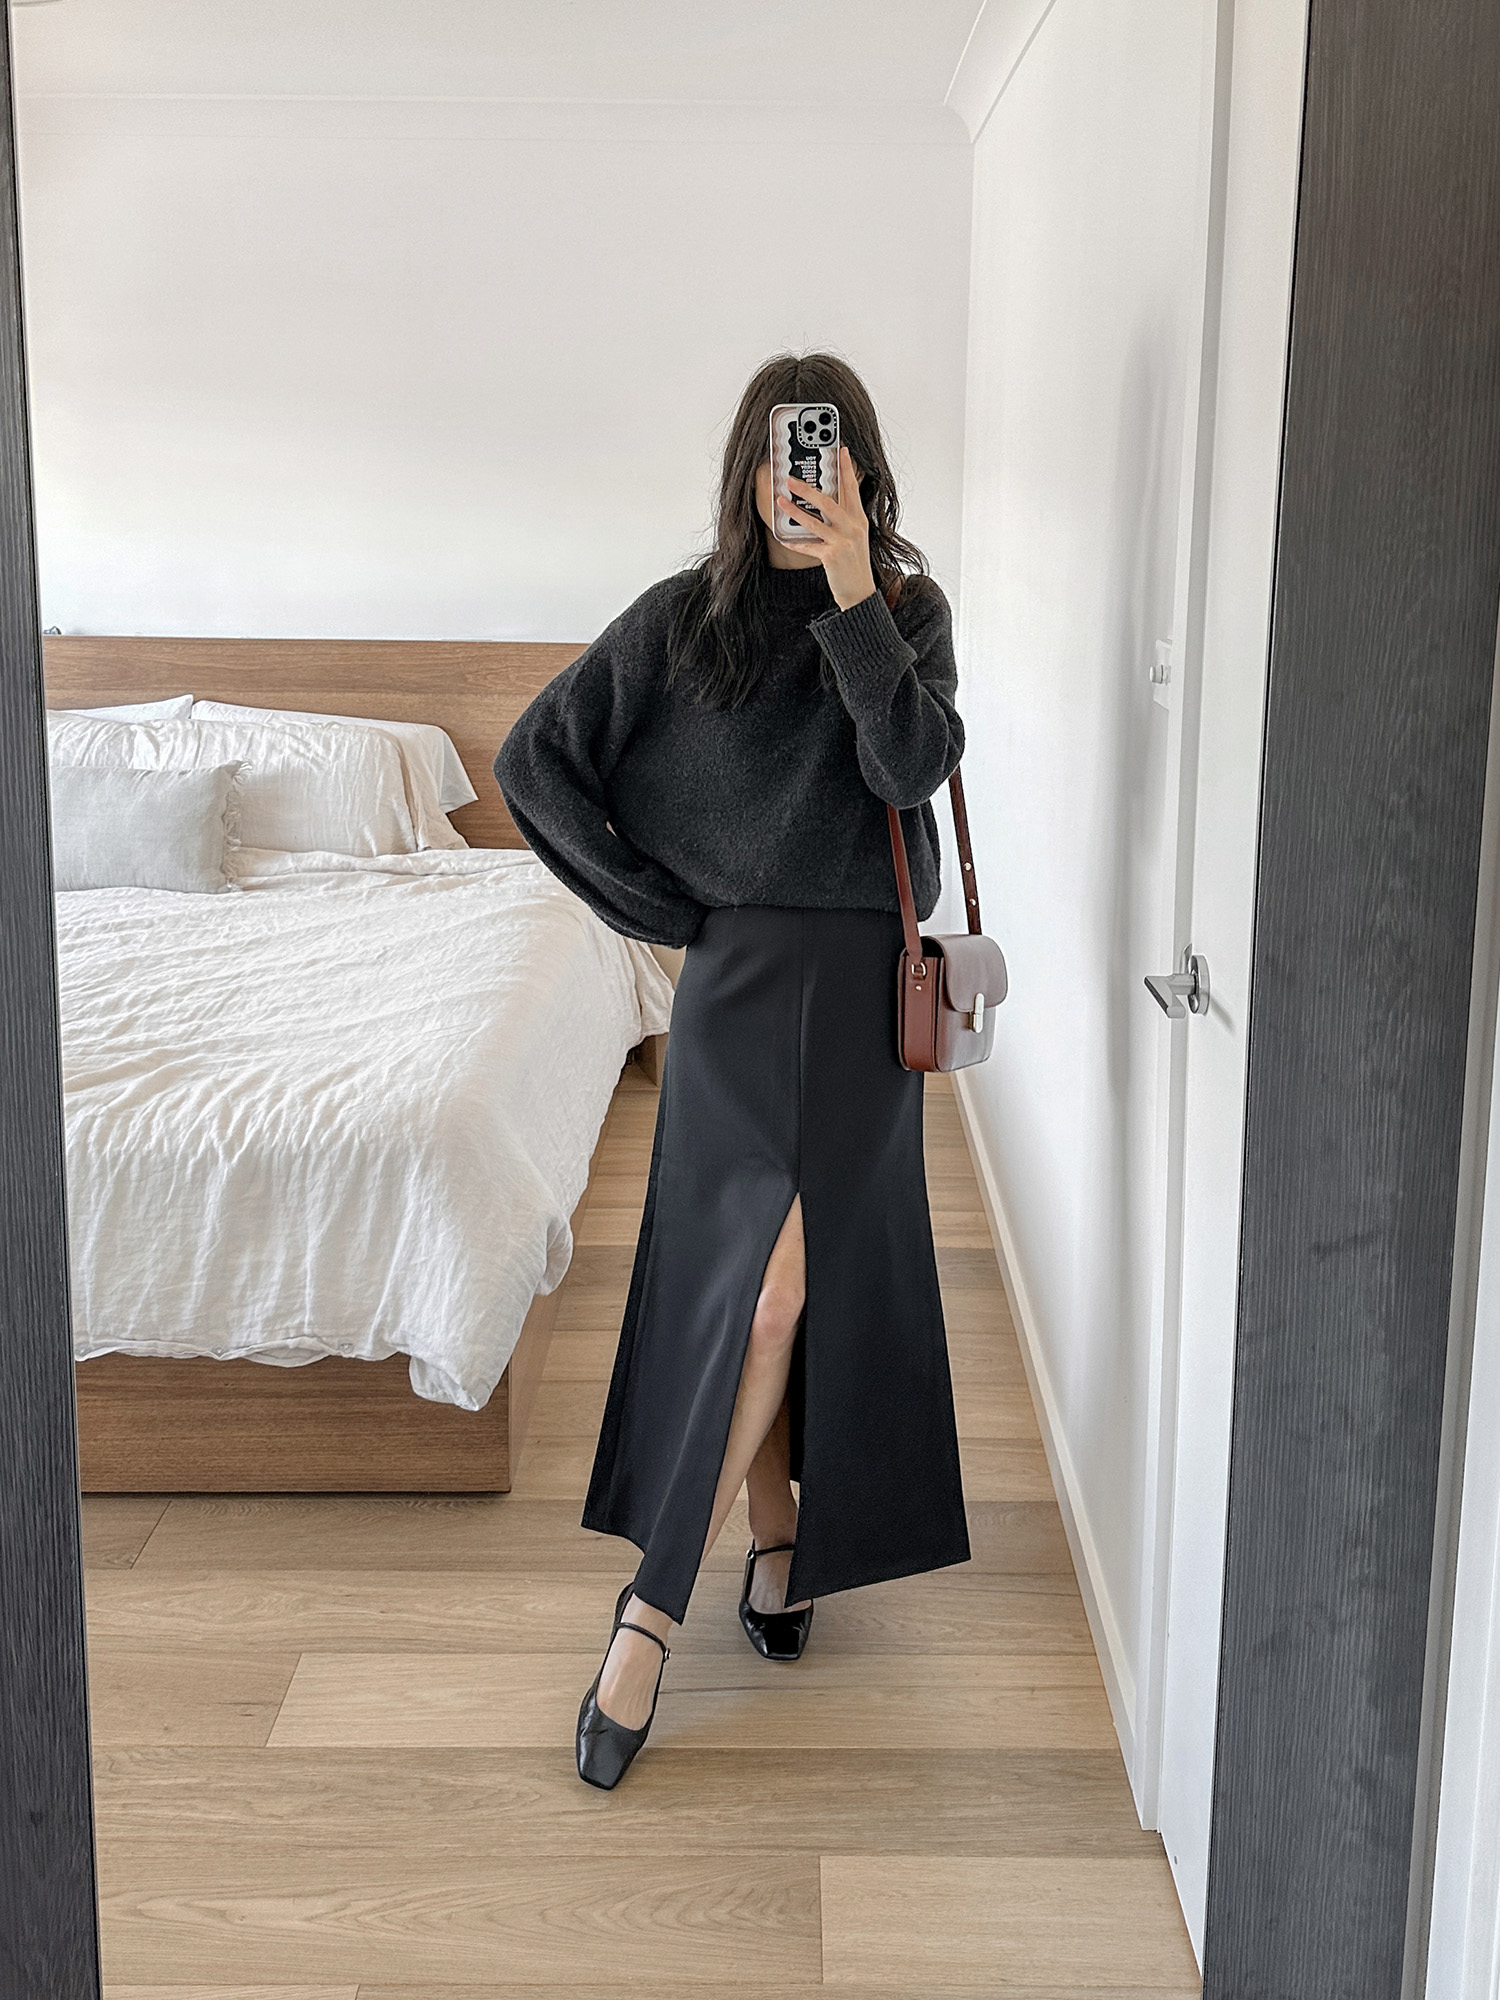 All black outfit with MAJ'R Label split skirt and Aeyde Uma flats